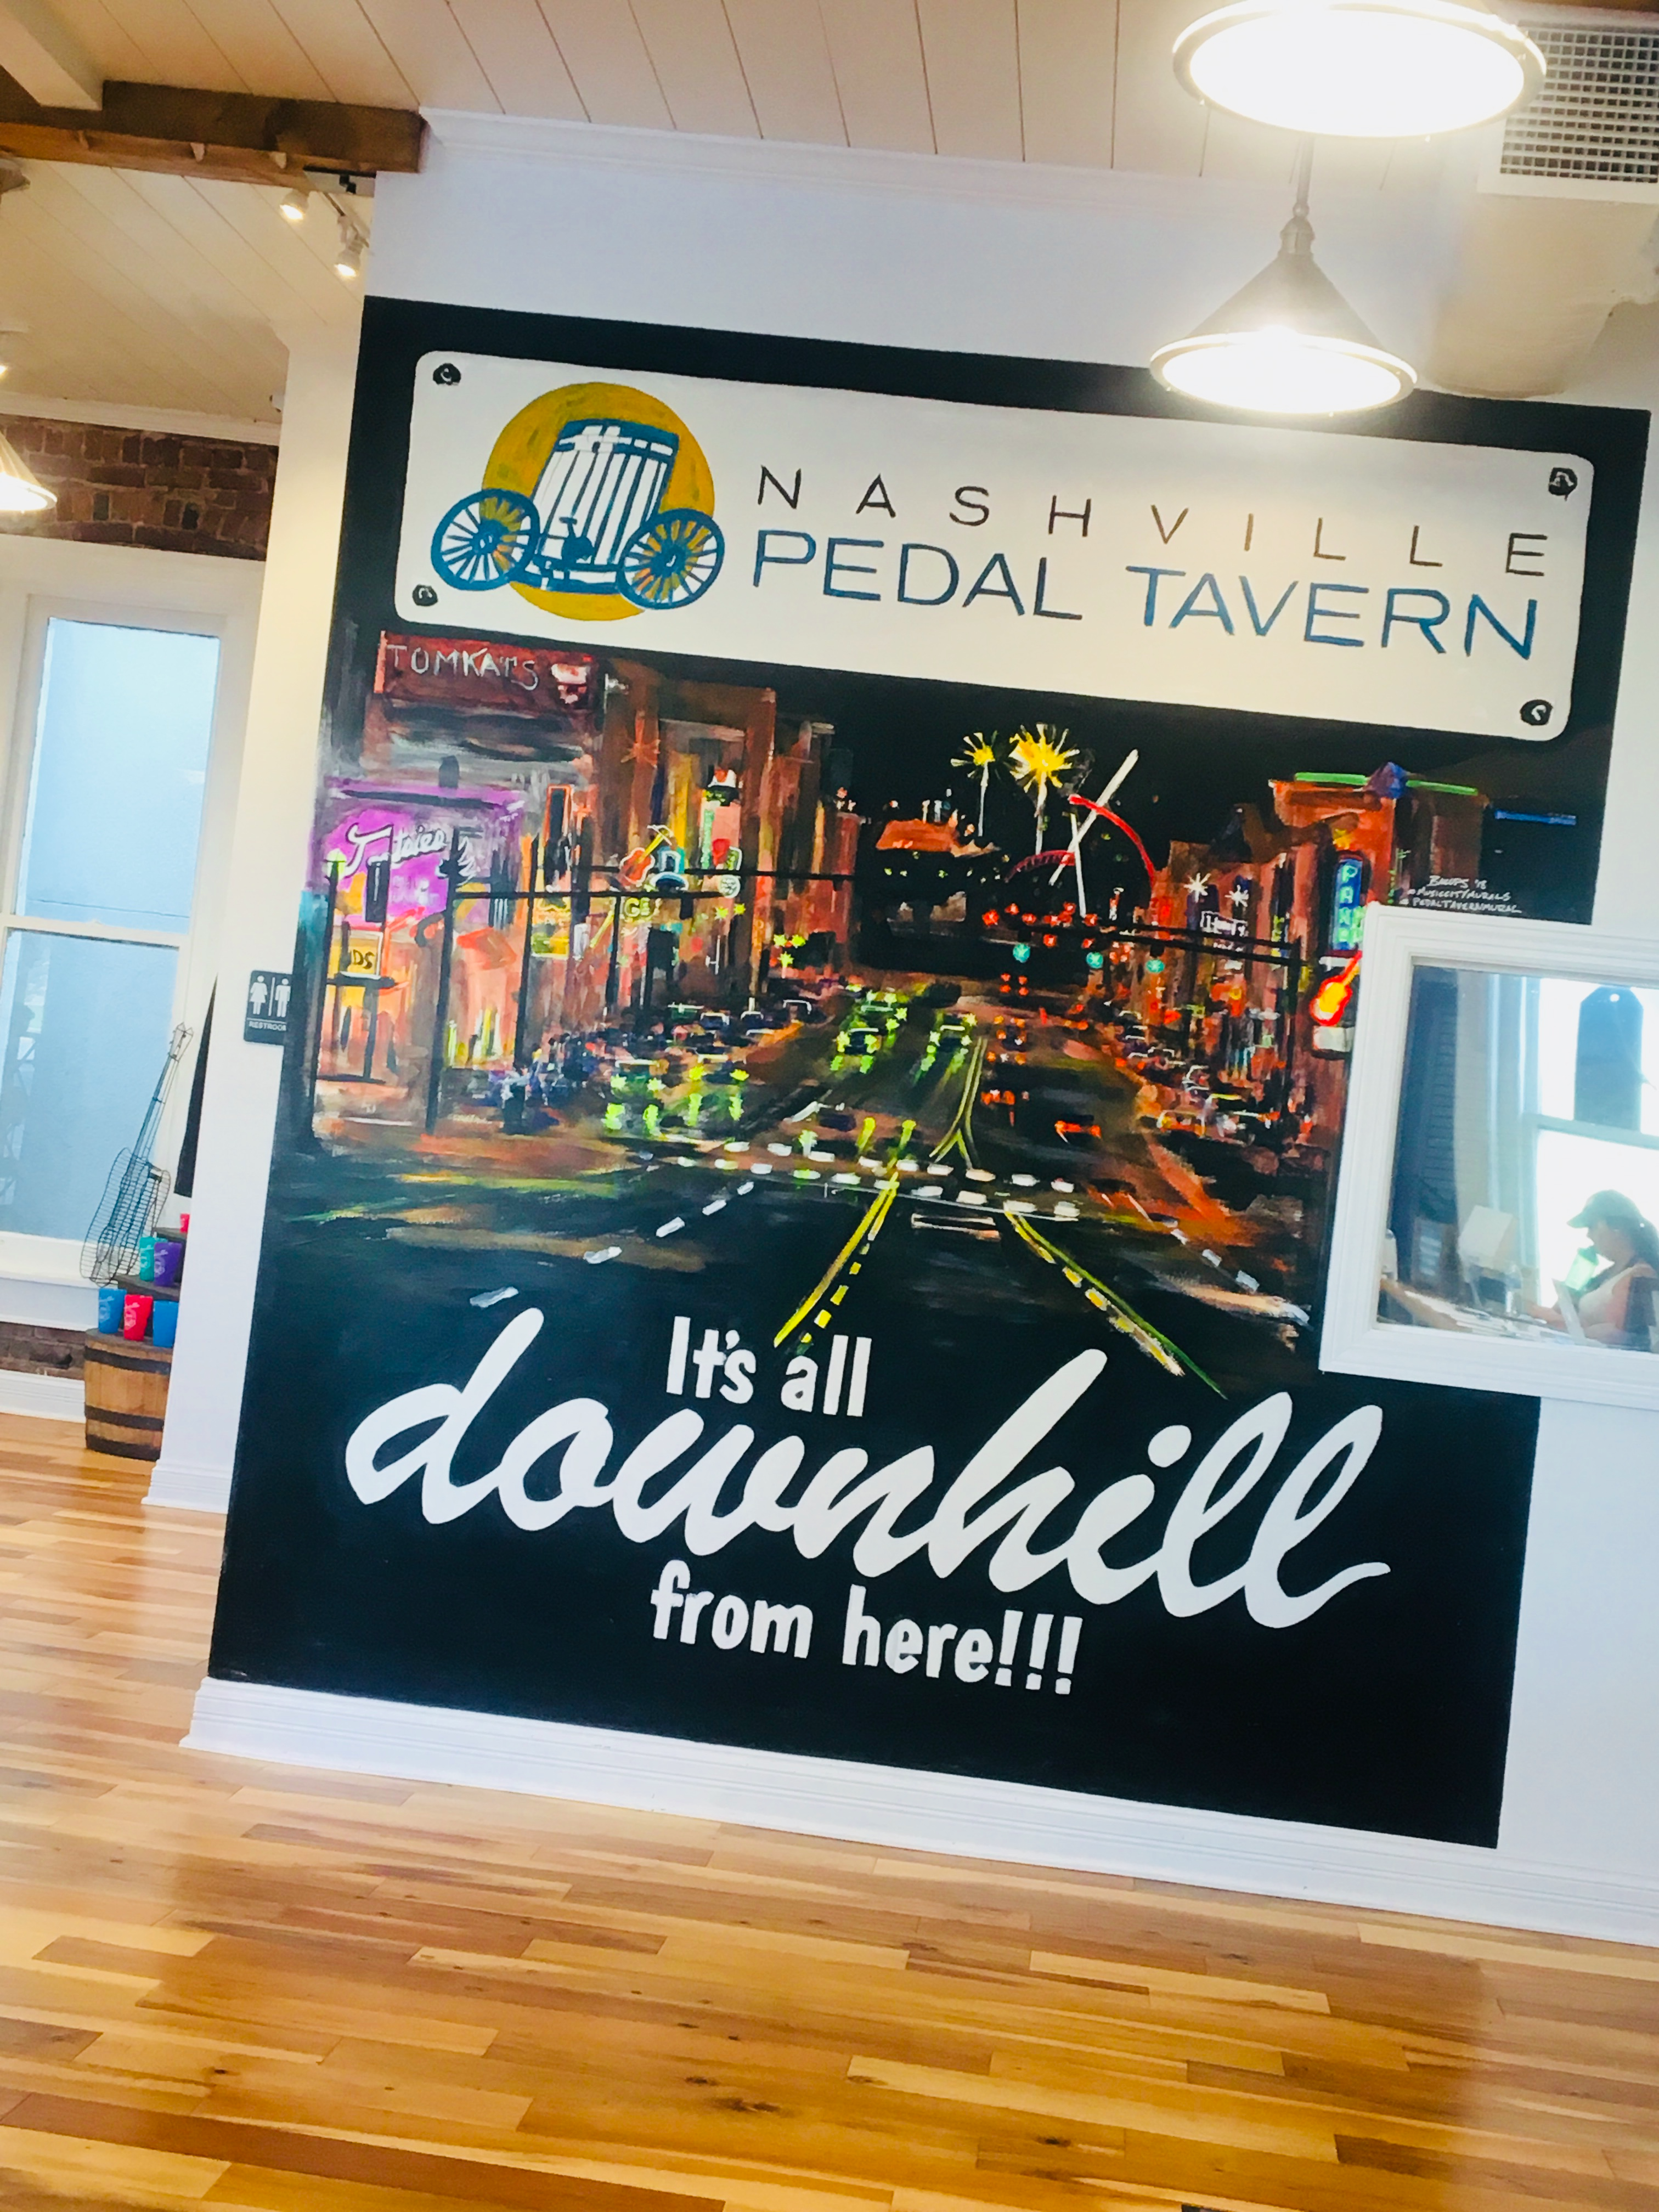 Poster in the Nashville Pedal Tavern office that reads "It's all downhill from here!!!"